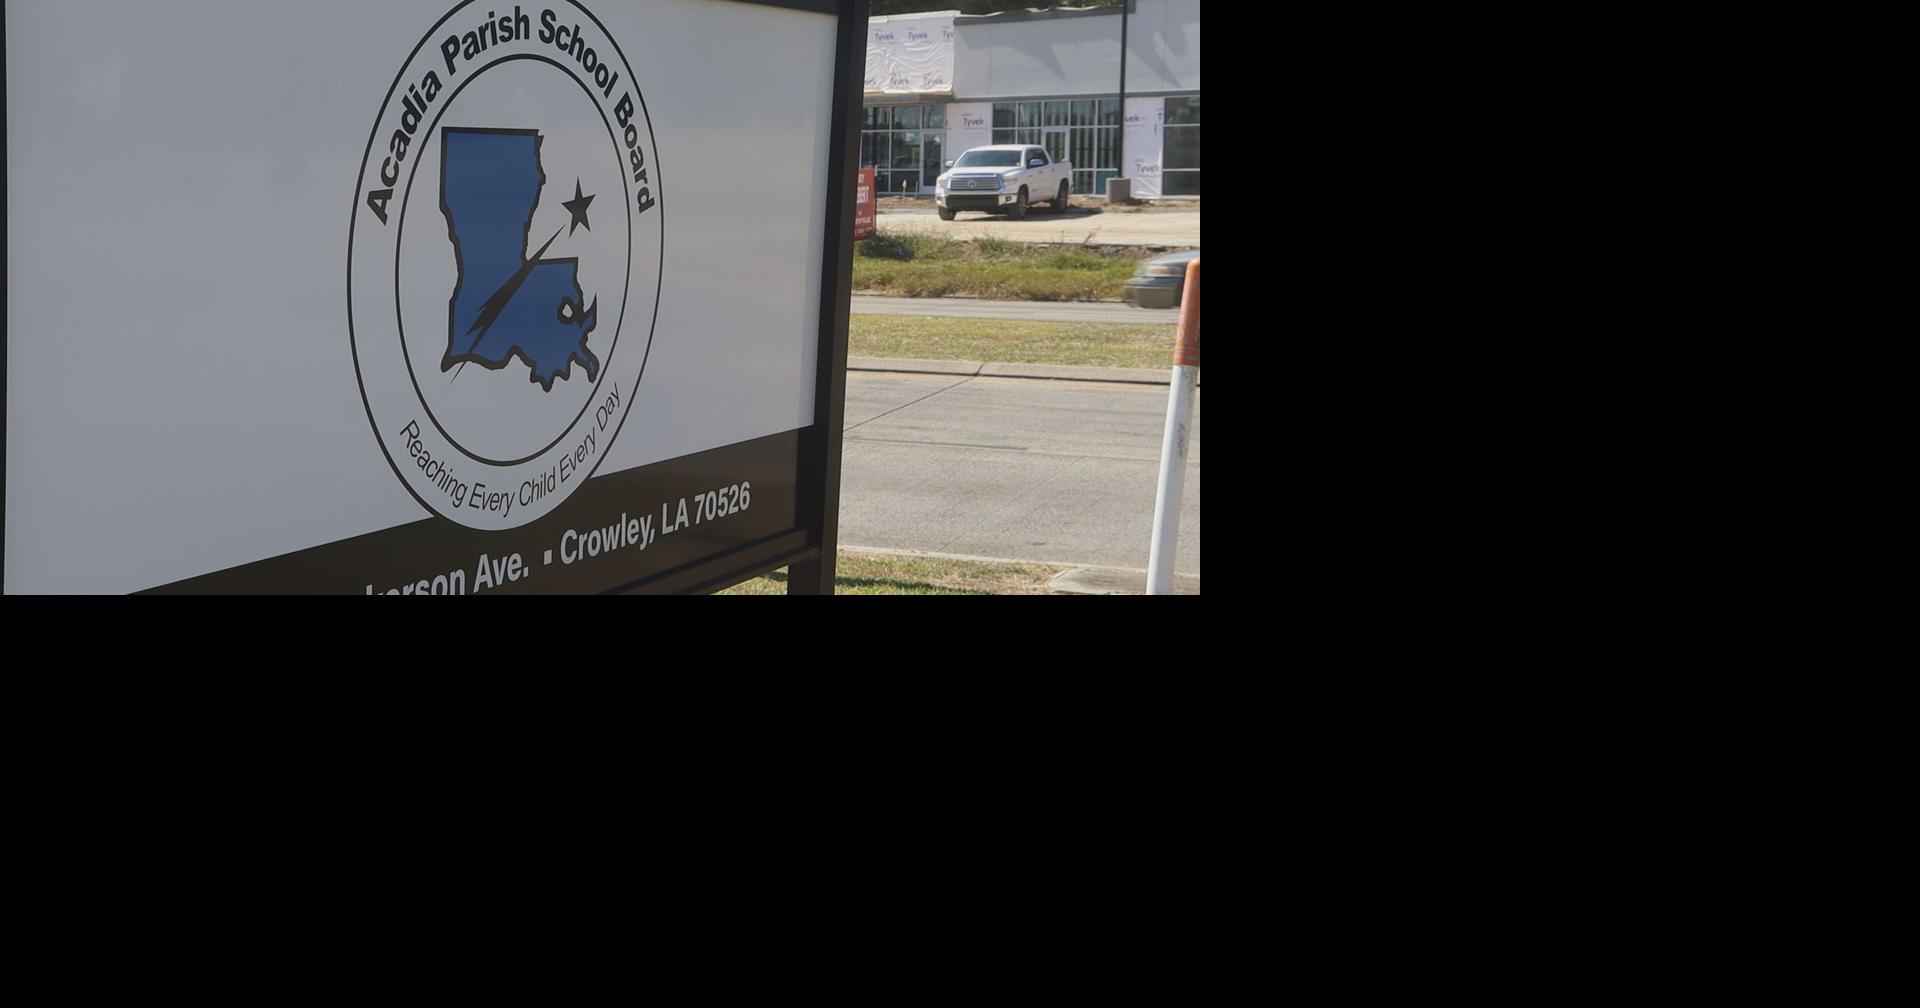 Acadia Parish School Board possibly implementing four-day work weeks